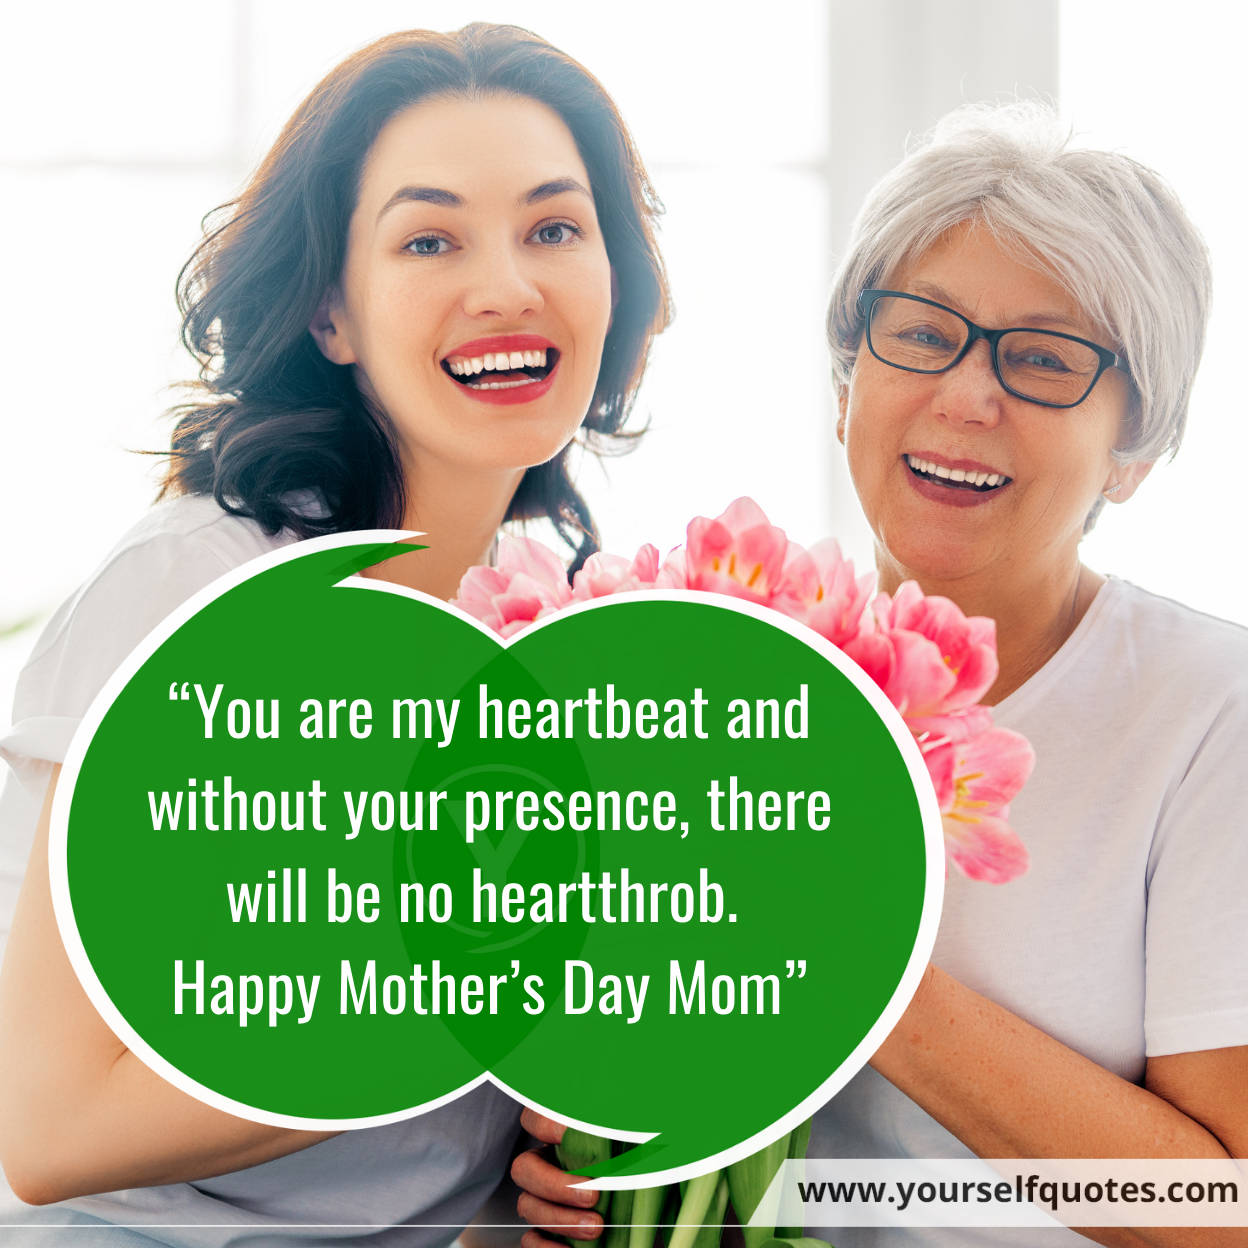 Happy Mother's Day Wishes, Quotes, Messages To Send Your Mom